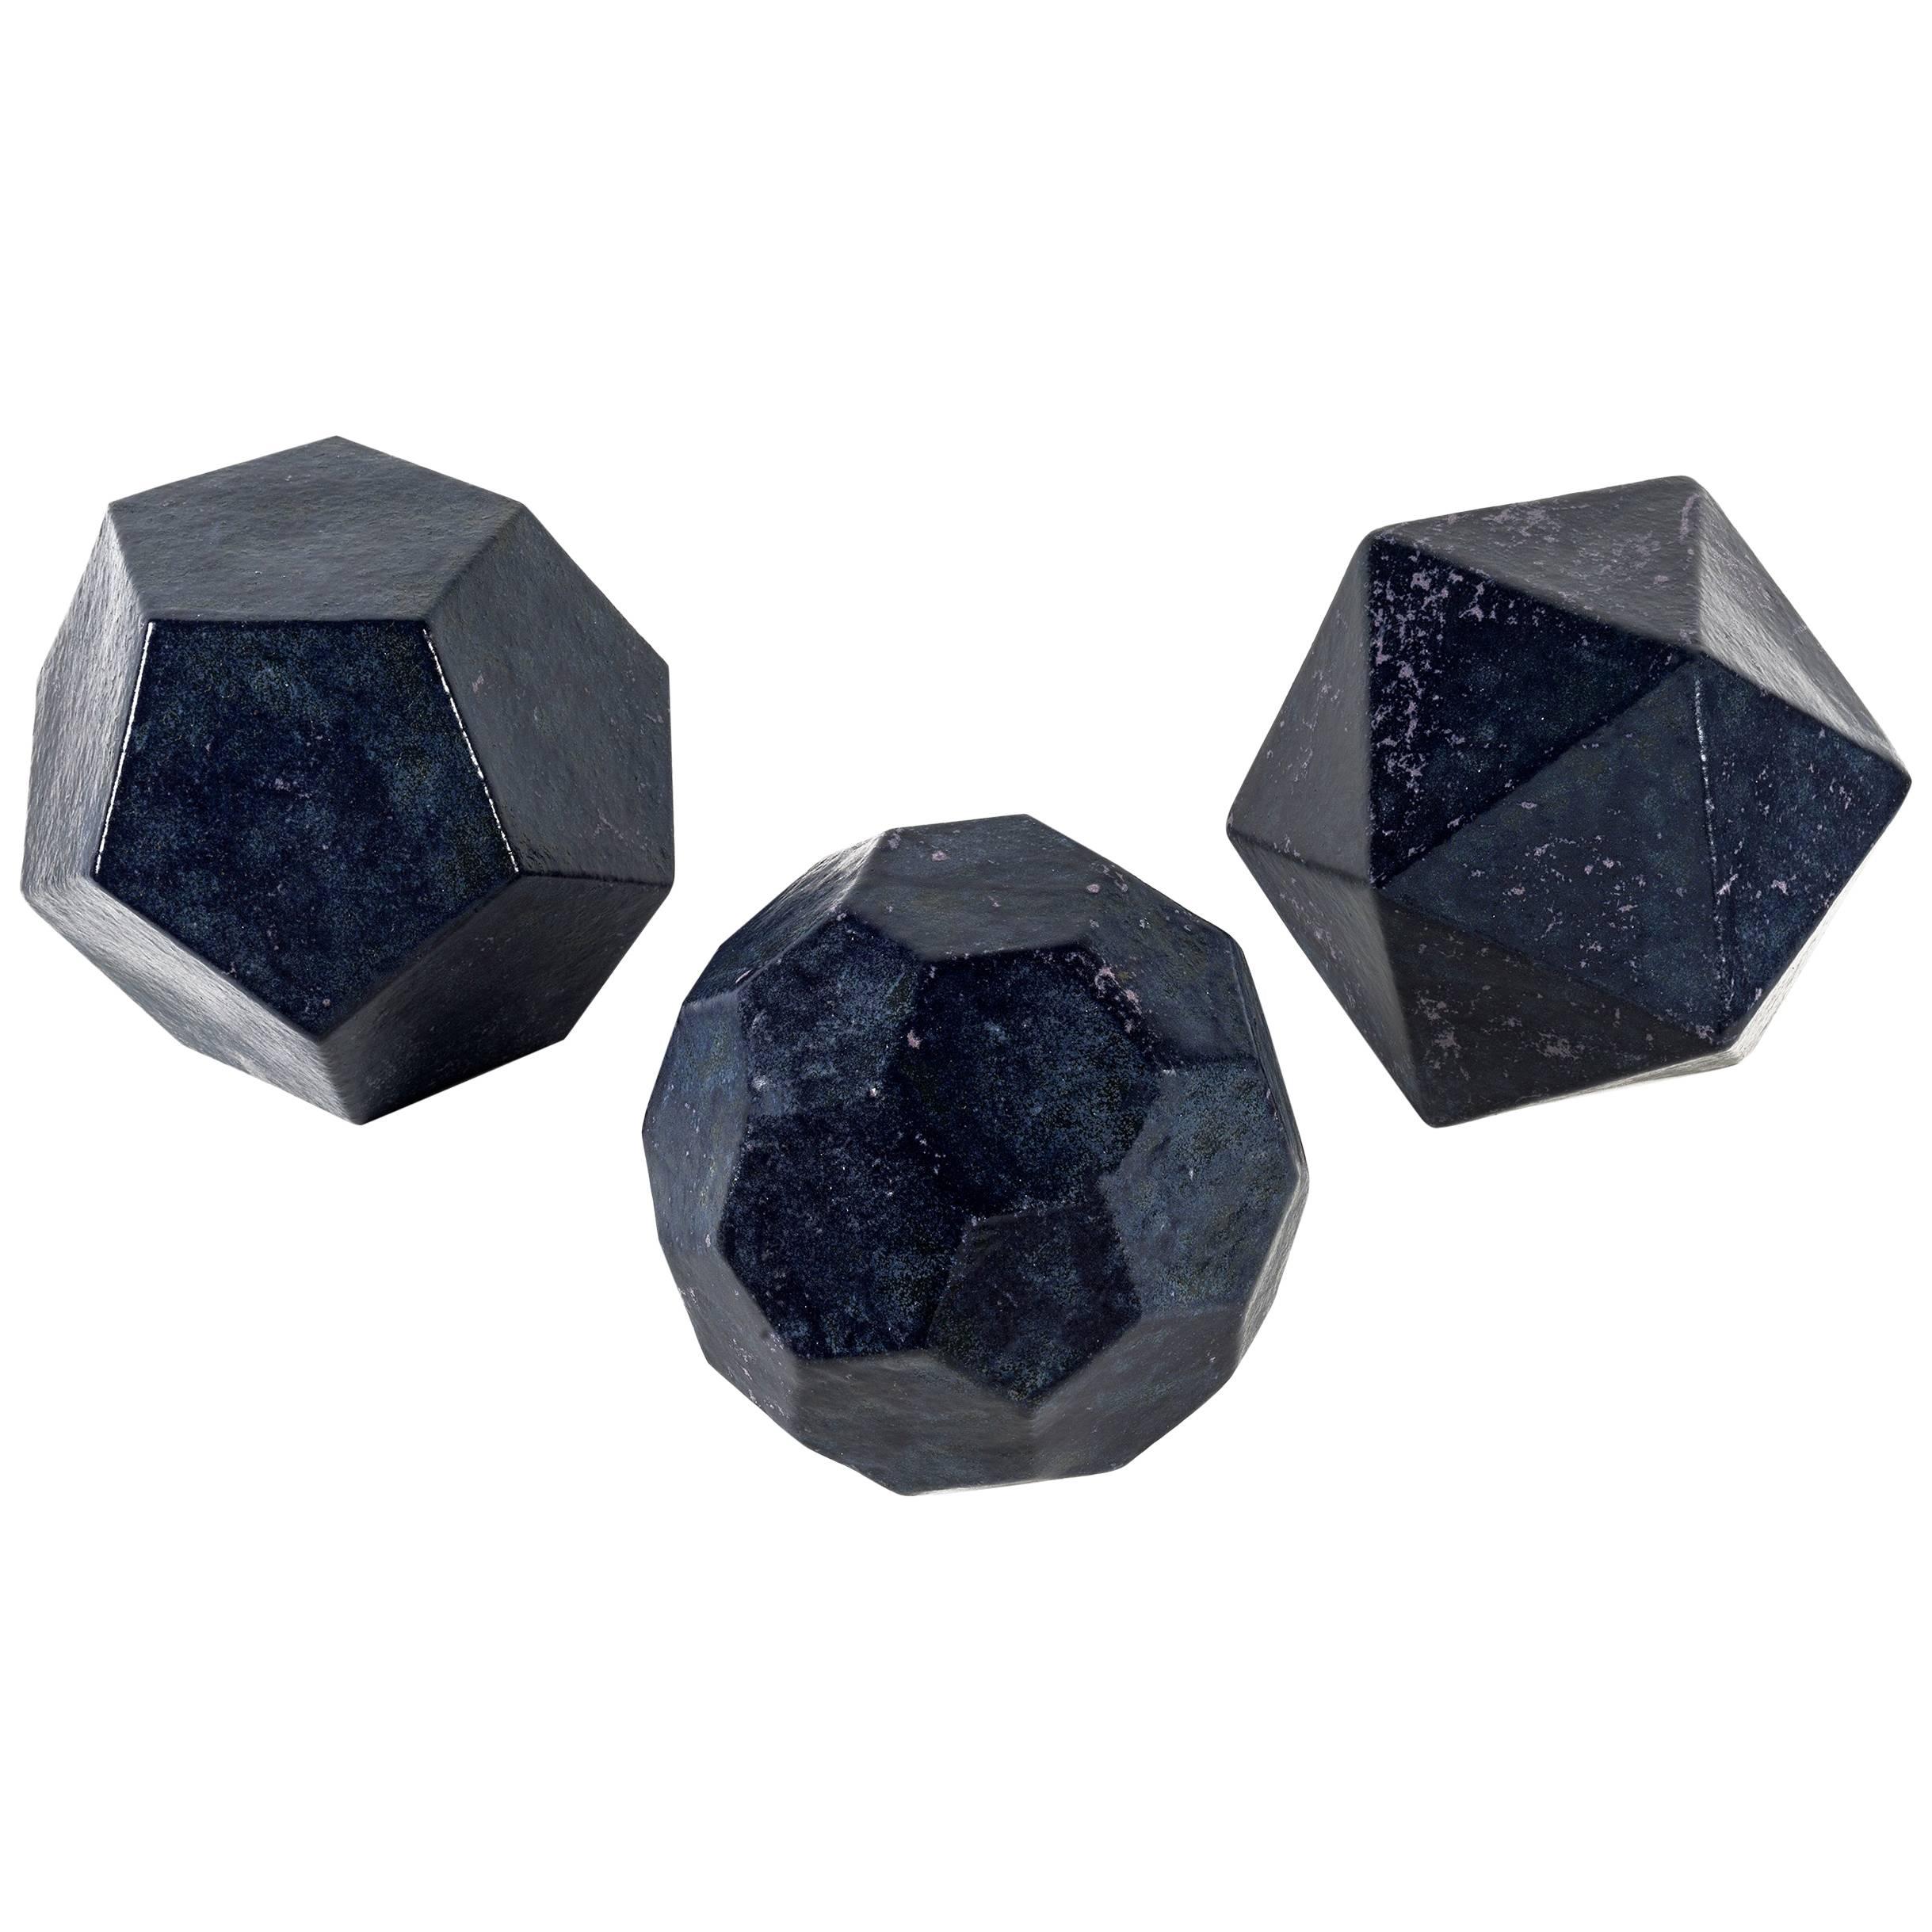 Cesare de Vita, Ceramic Triptych "Dodecahedron, Fullerene and Icosahedron" For Sale